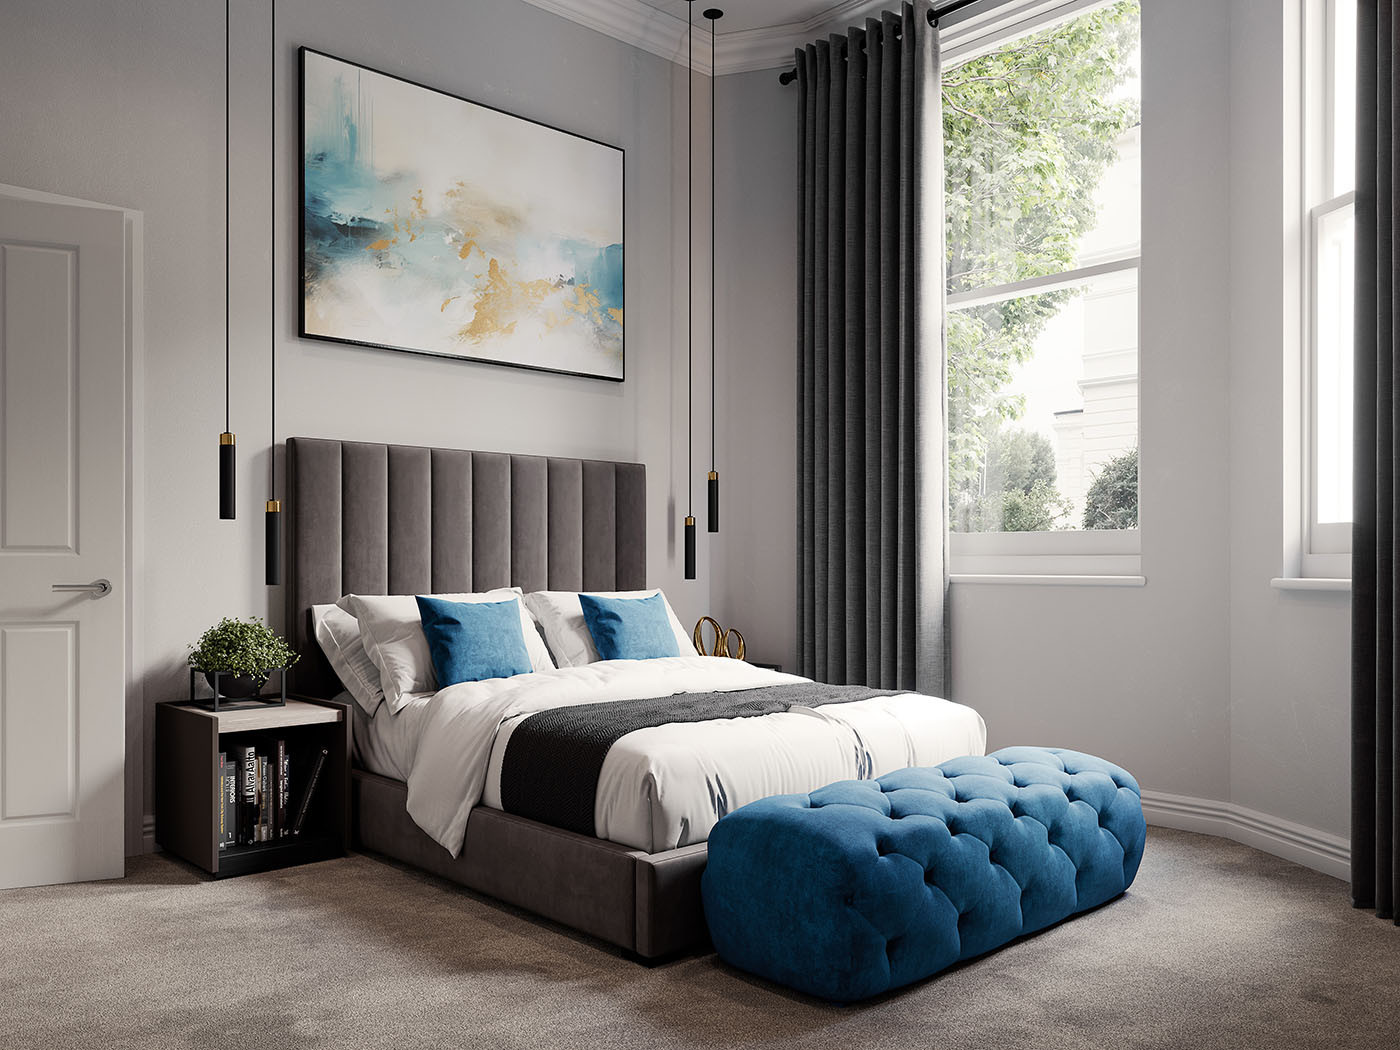 bedroom render with abstract artwork created by AI